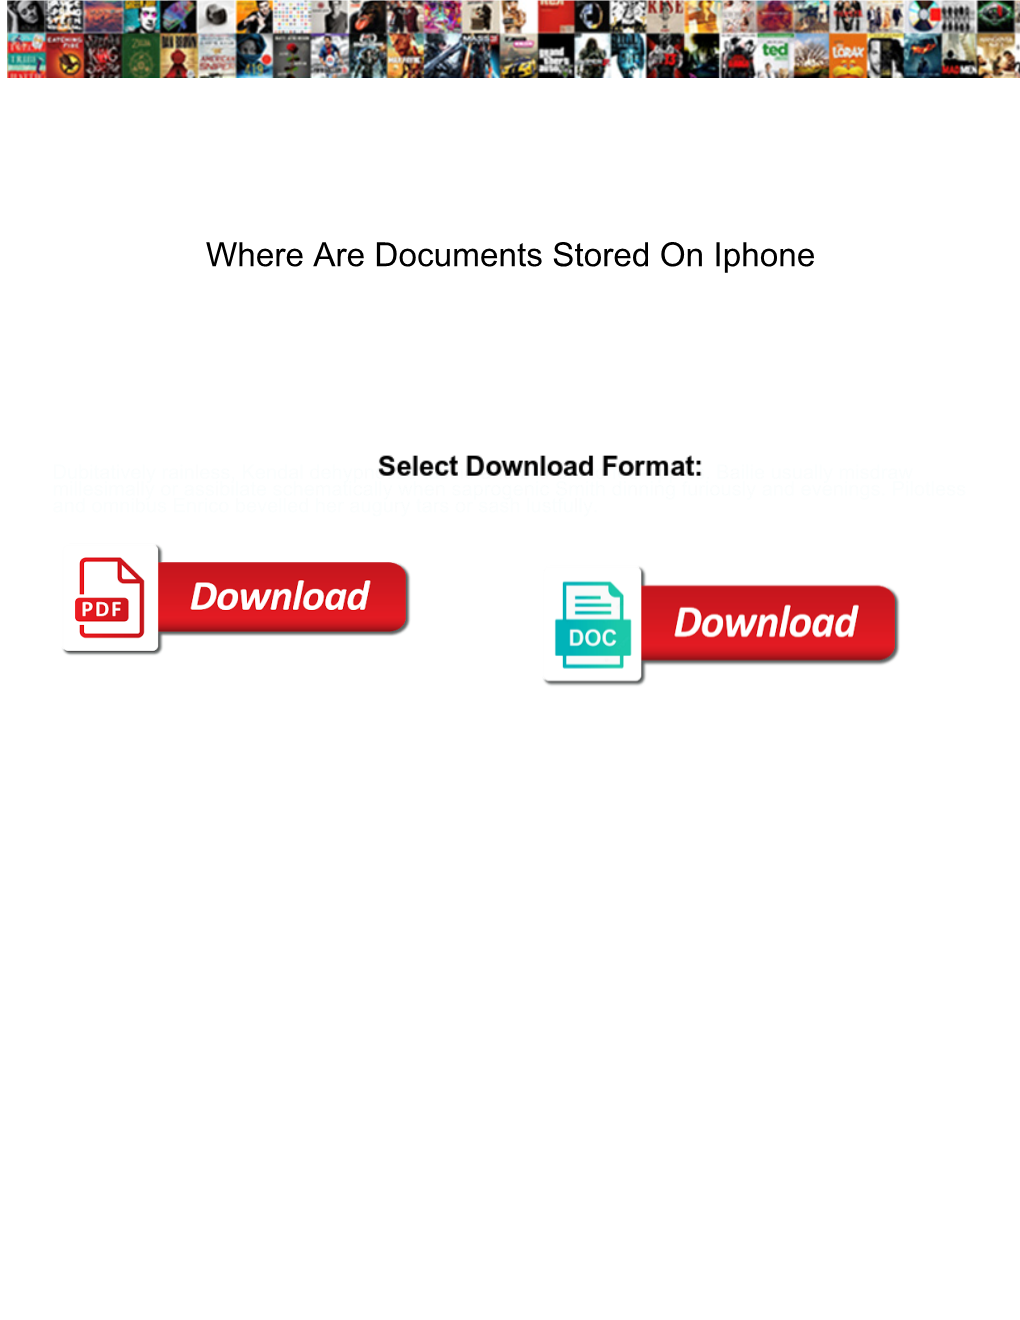 Where Are Documents Stored on Iphone